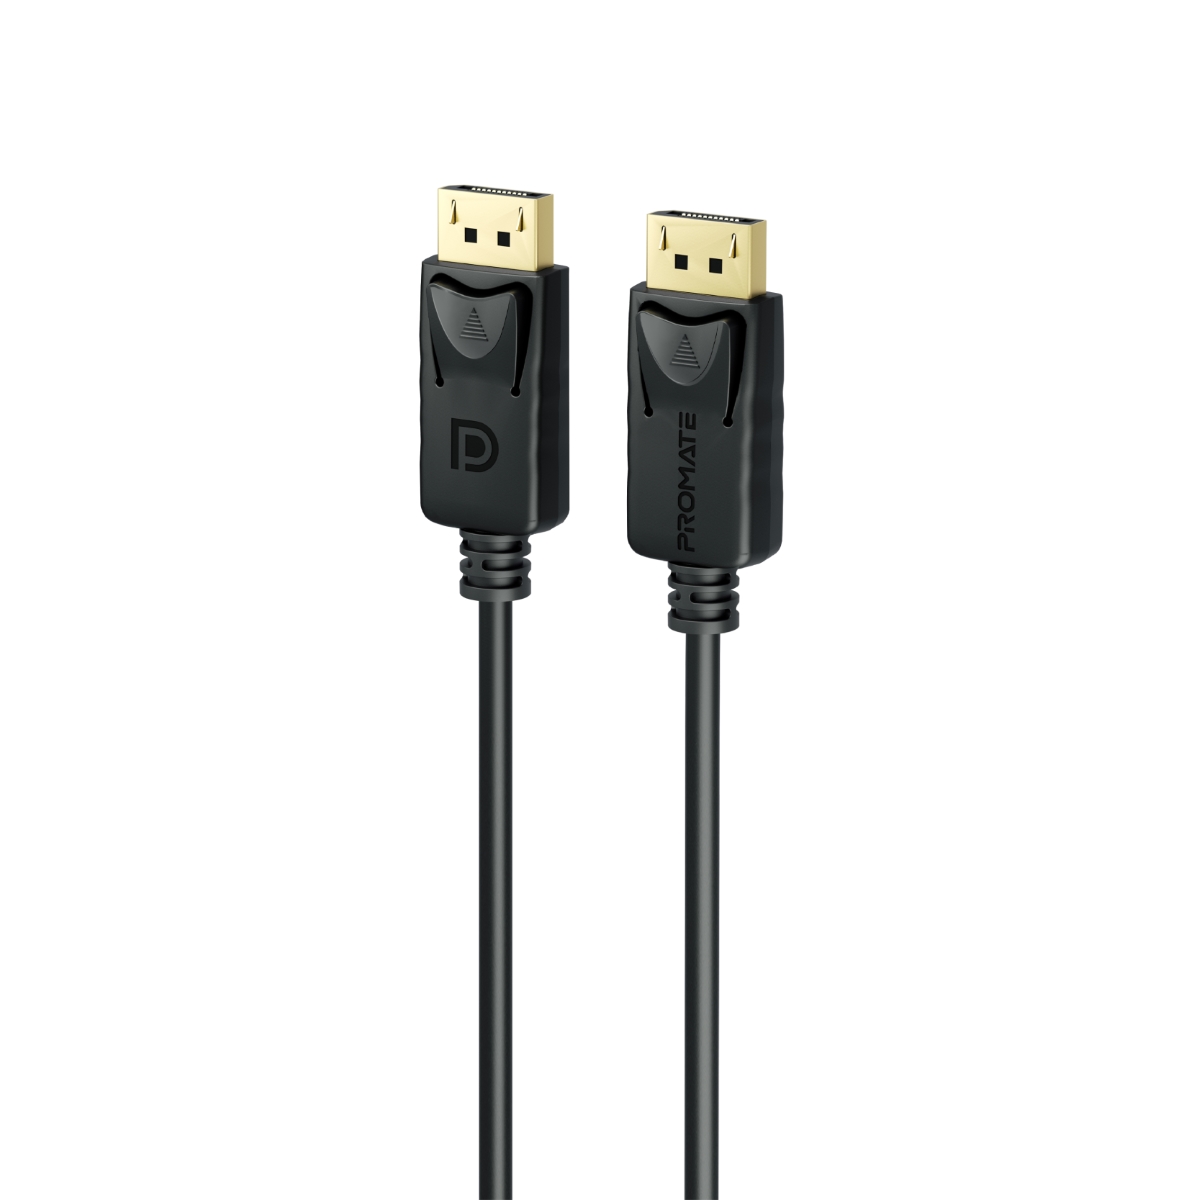 Promate DisplayPort Cable with HD 8K@60Hz Display, 32.4Gbps Bandwidth and 1.2m Slim Cable, DPLink-120